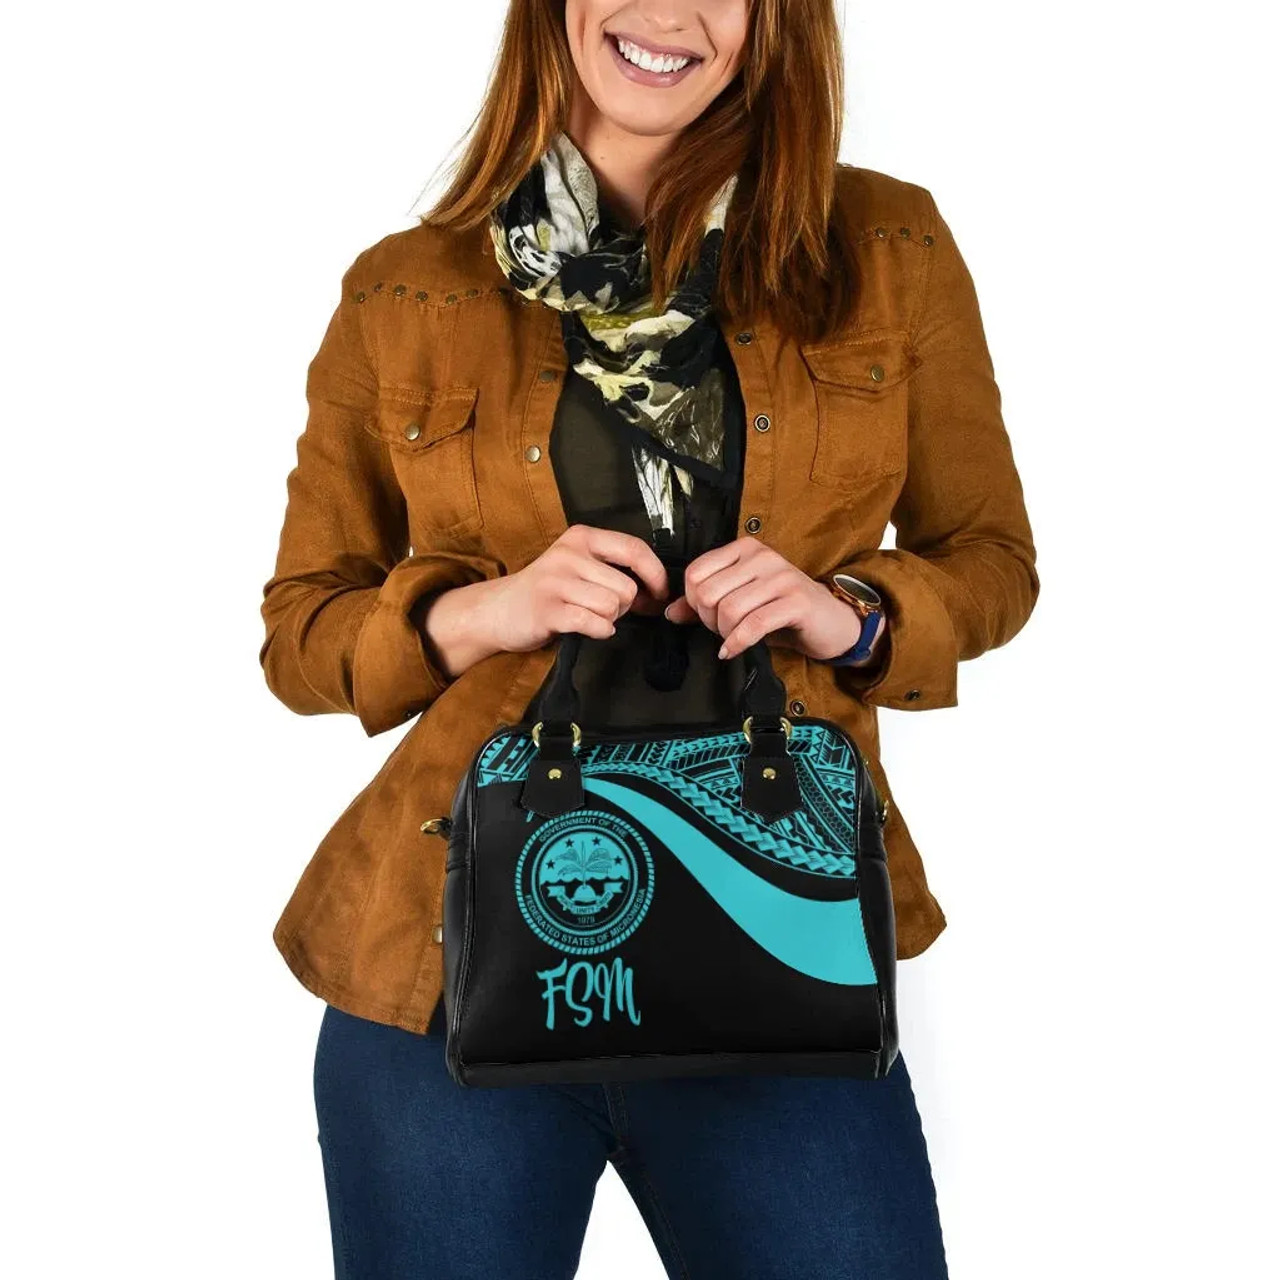 Federated States Of Micronesia Shoulder Handbag - Turquoise Polynesian Tentacle Tribal Pattern 4